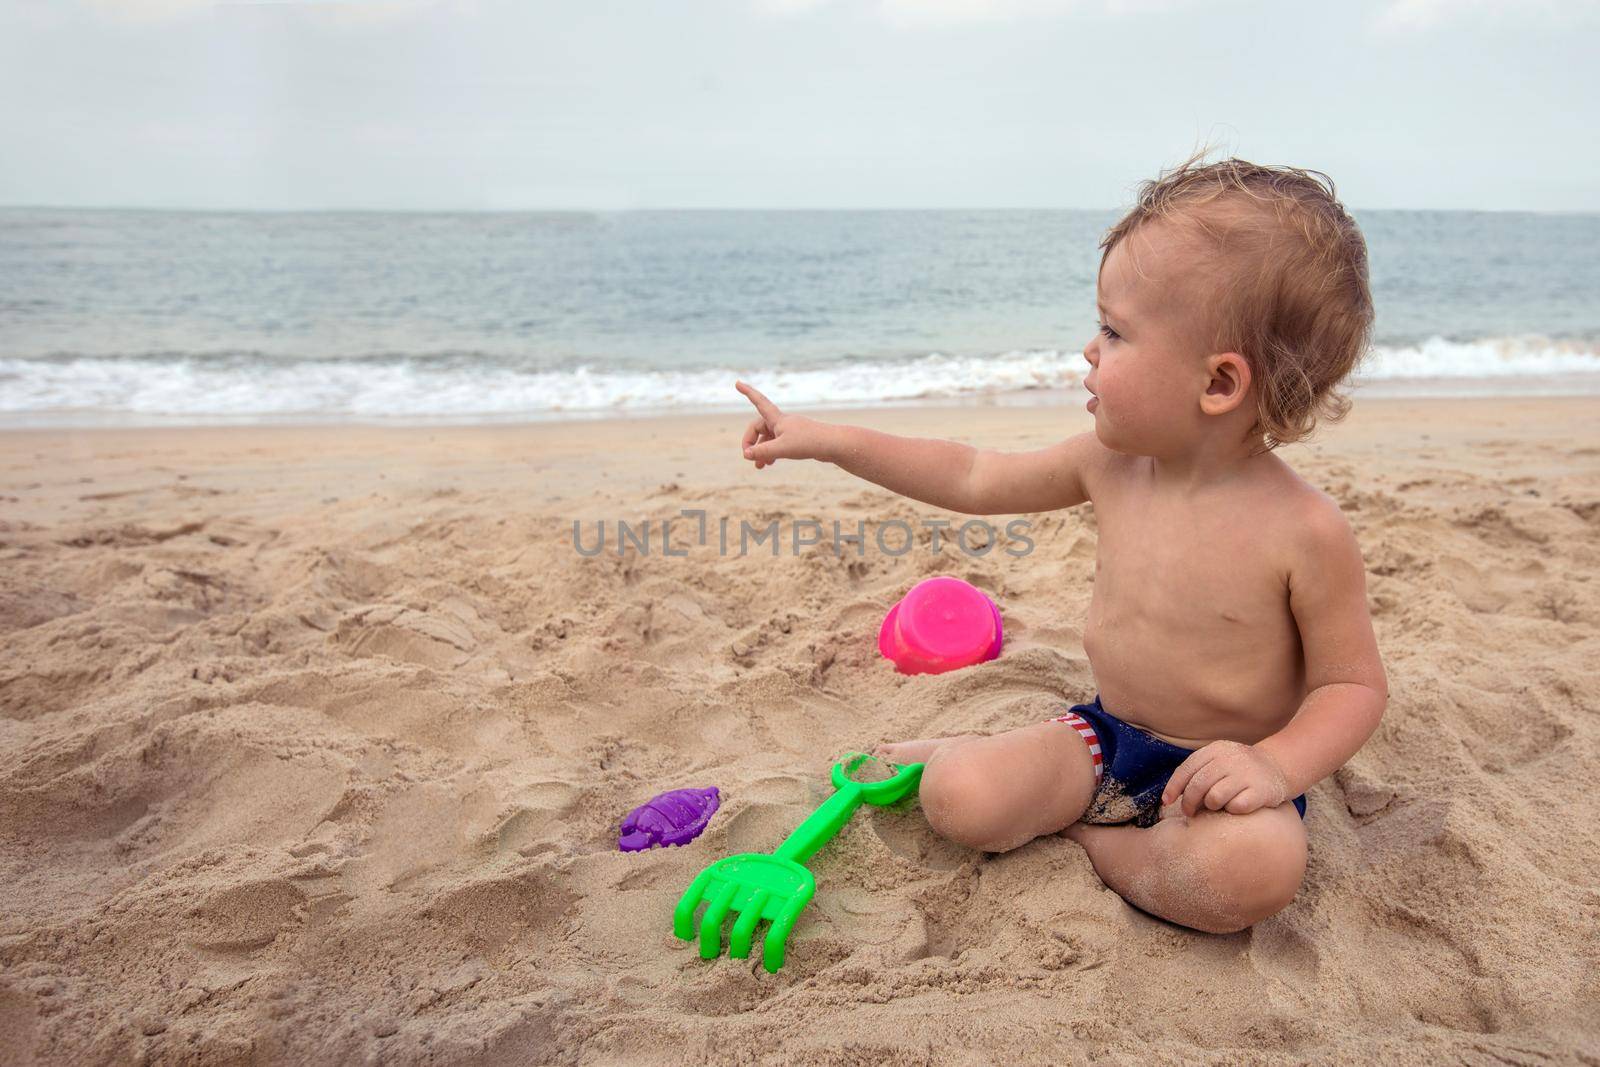 Cute baby boy playing with beach toys. The kid is pointing at something